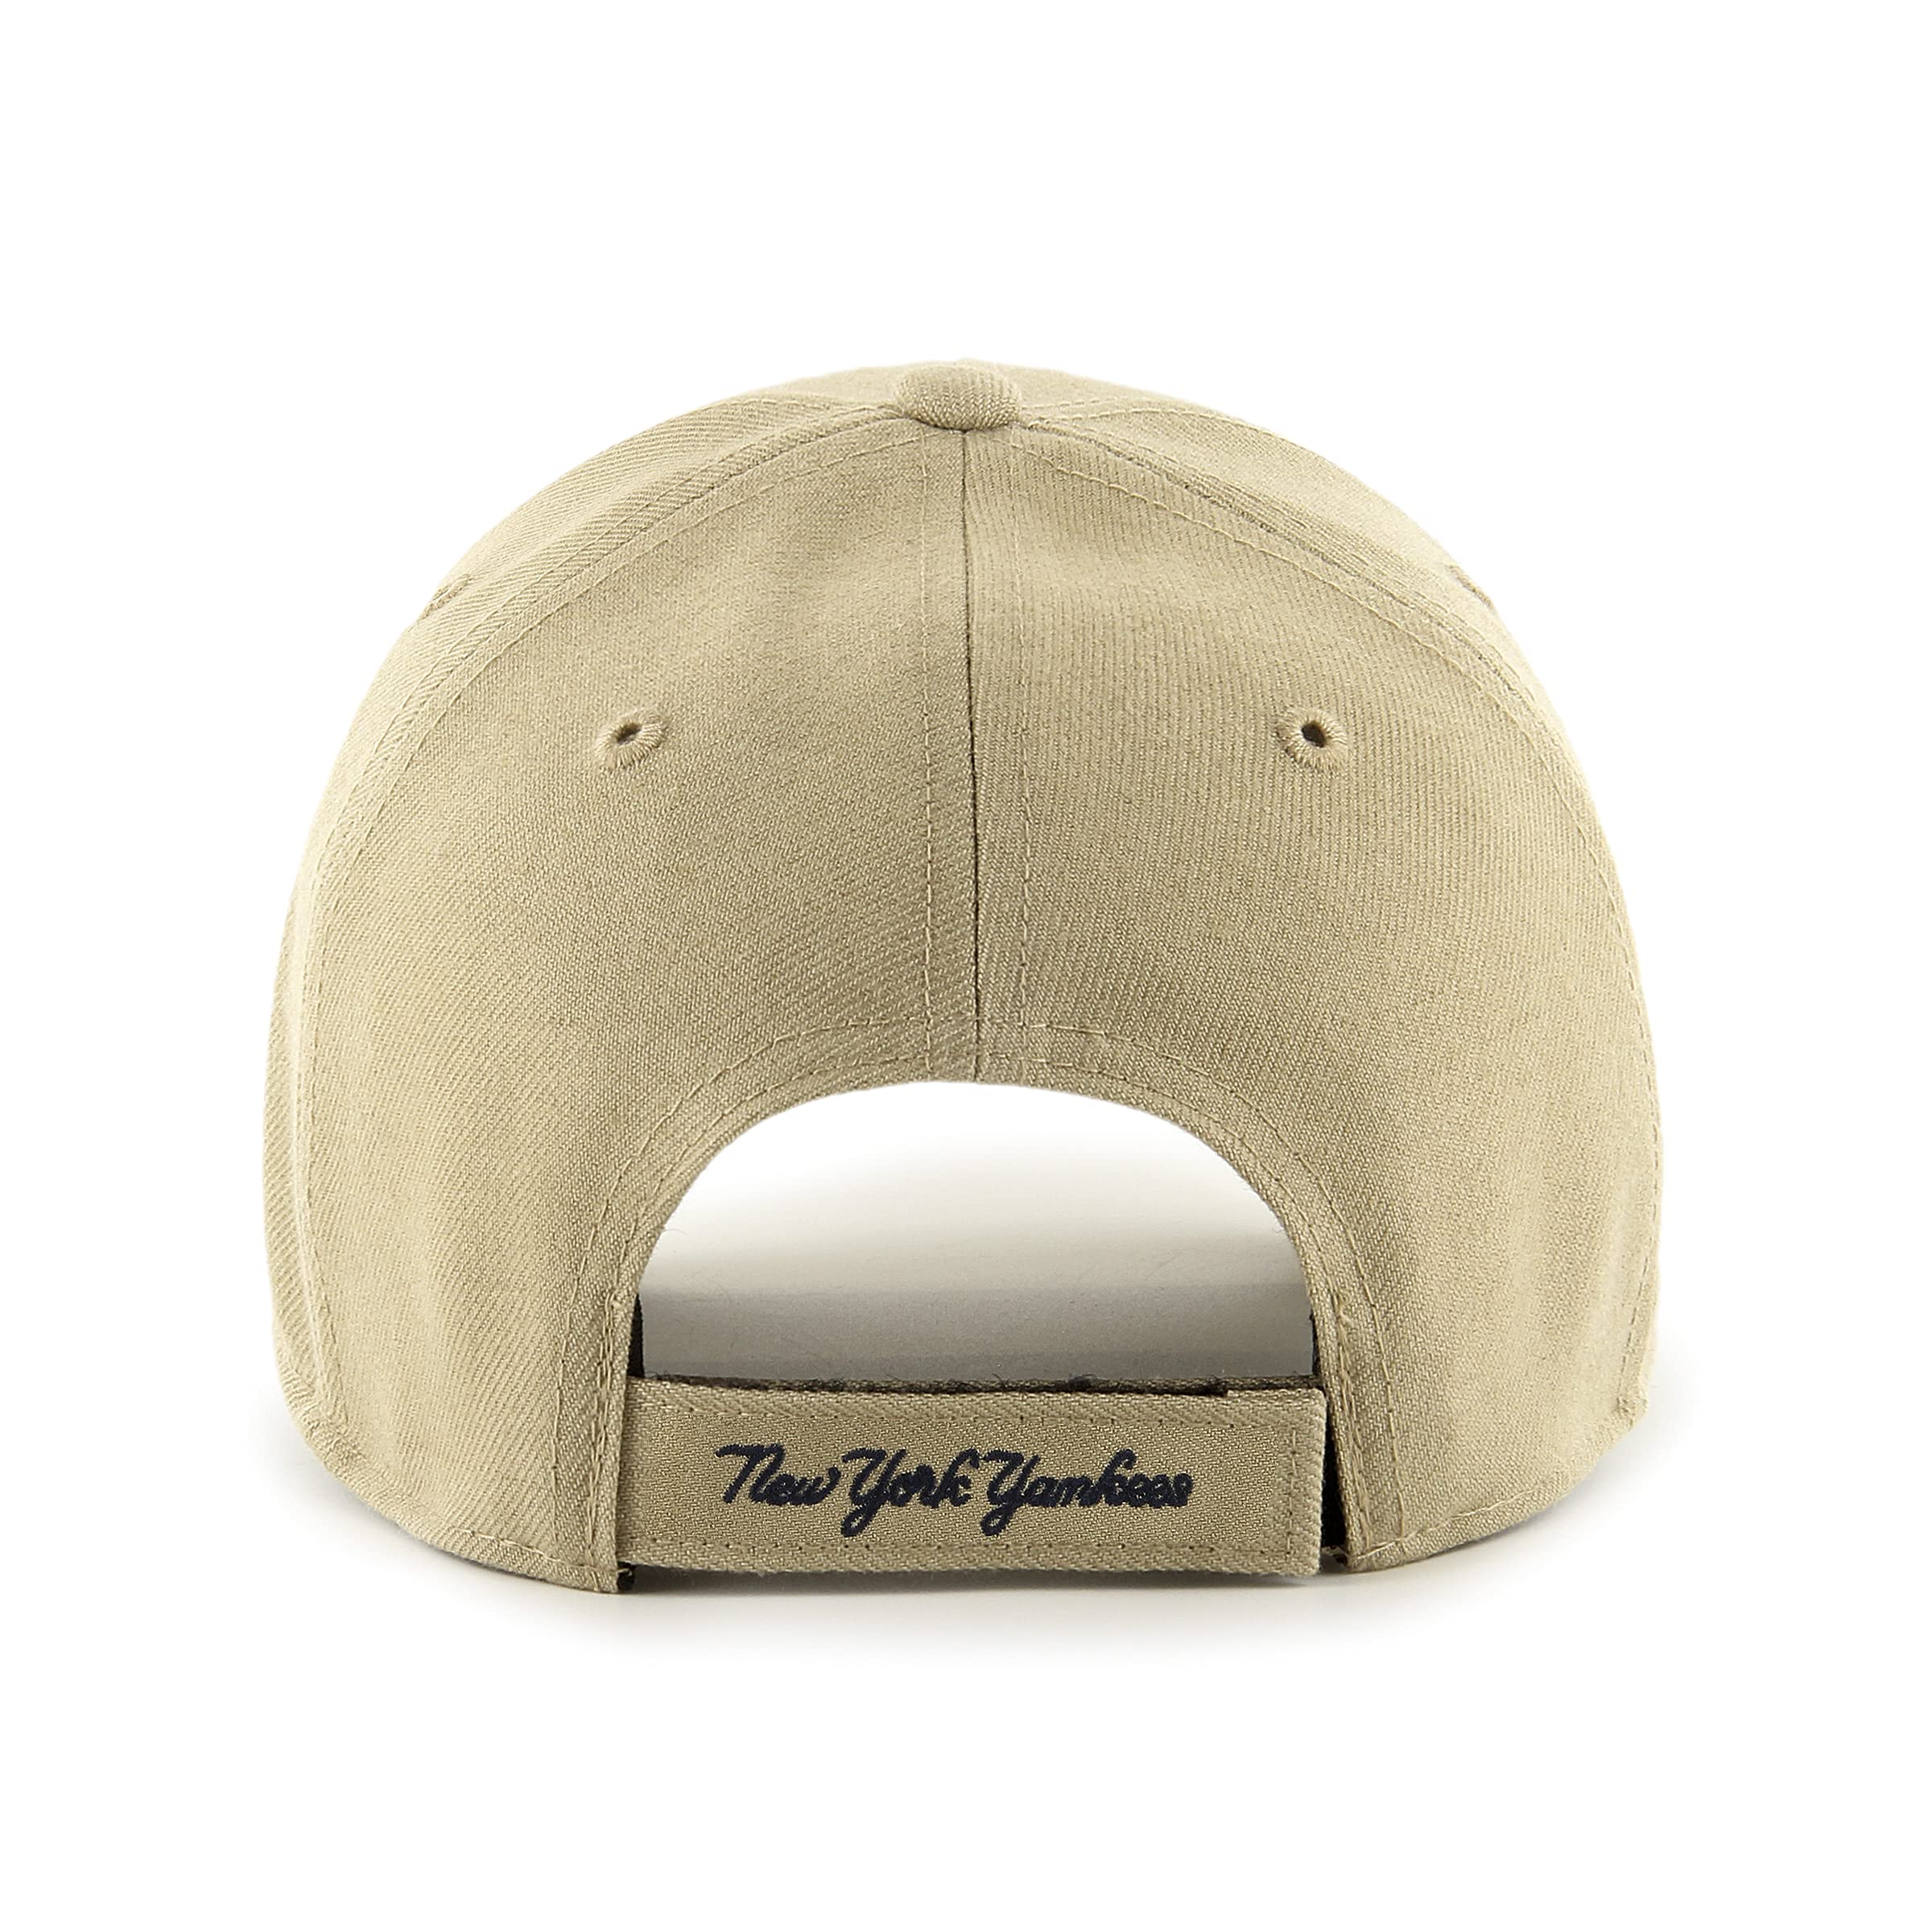 MLB UNISEX CURVED CAP 3ACP7701N 50BGS NEW YORK YANKEES BEIGE  Centralcoth